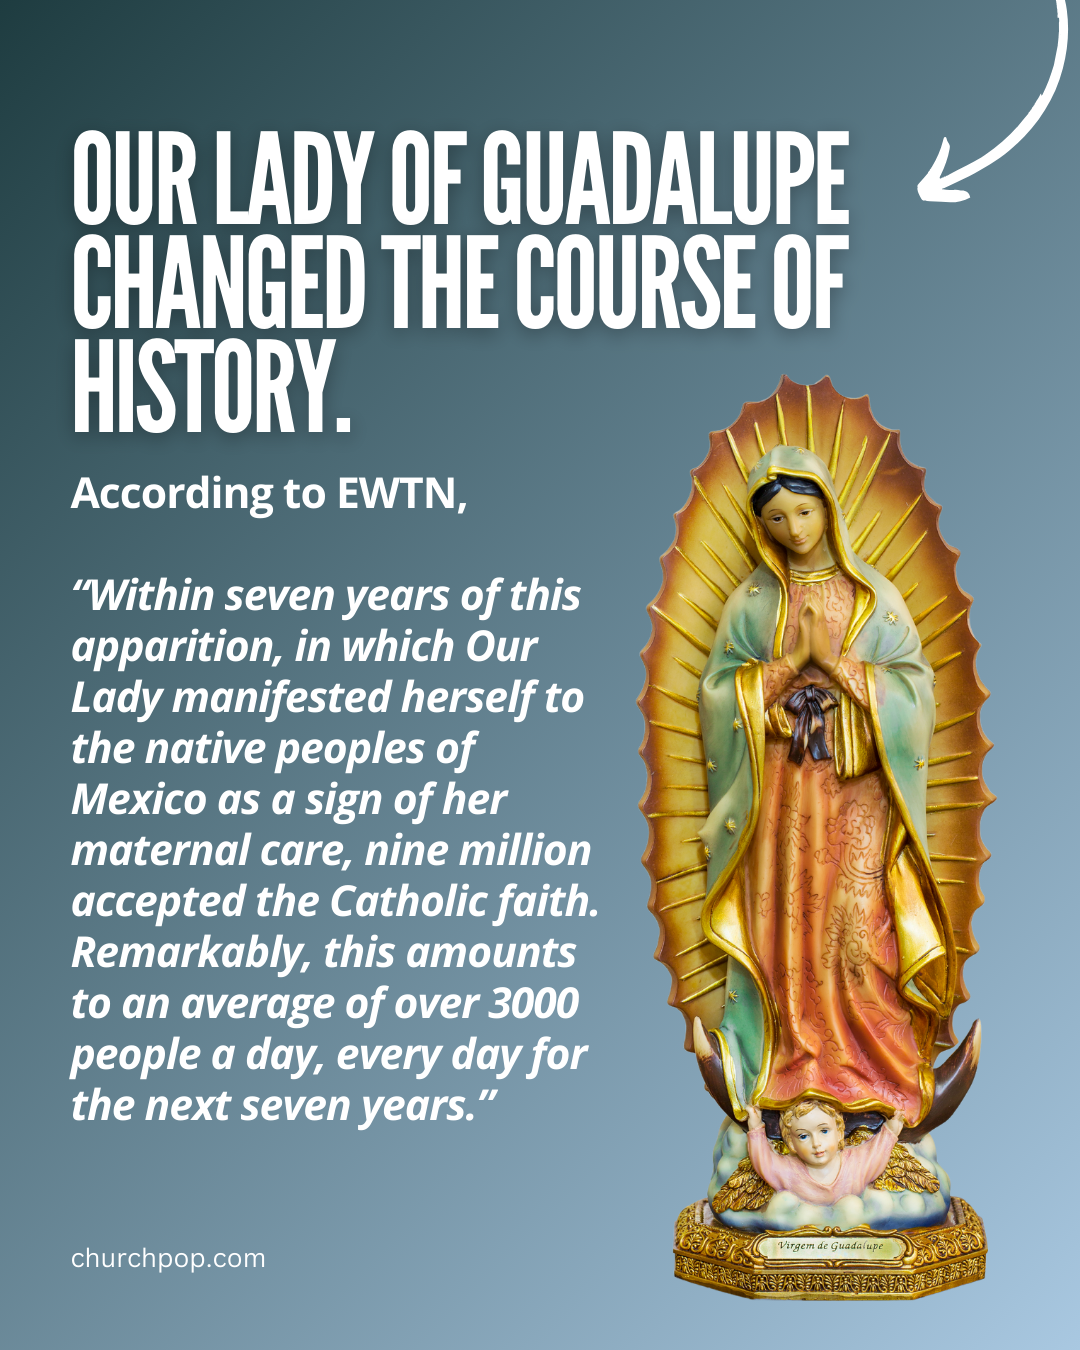 Our Lady of Guadalupe Image, guadalupe our lady, guadalupe virgin, our lady of guadalupe